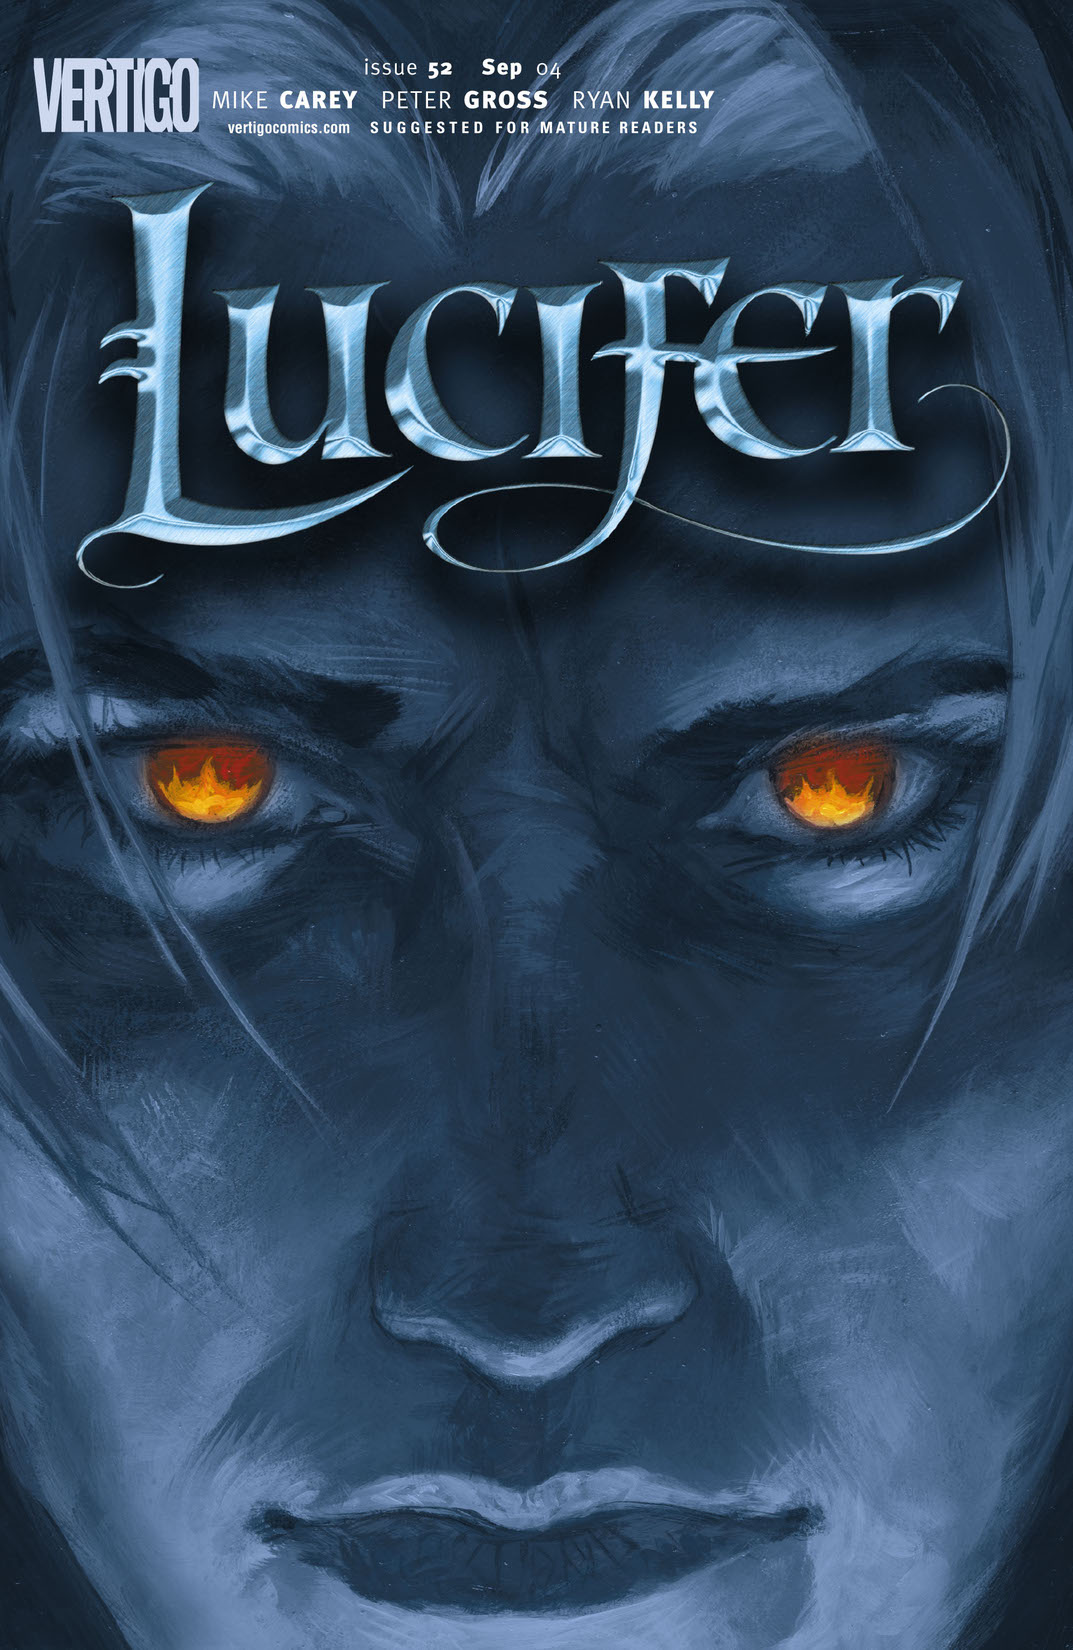 Lucifer #52 preview images